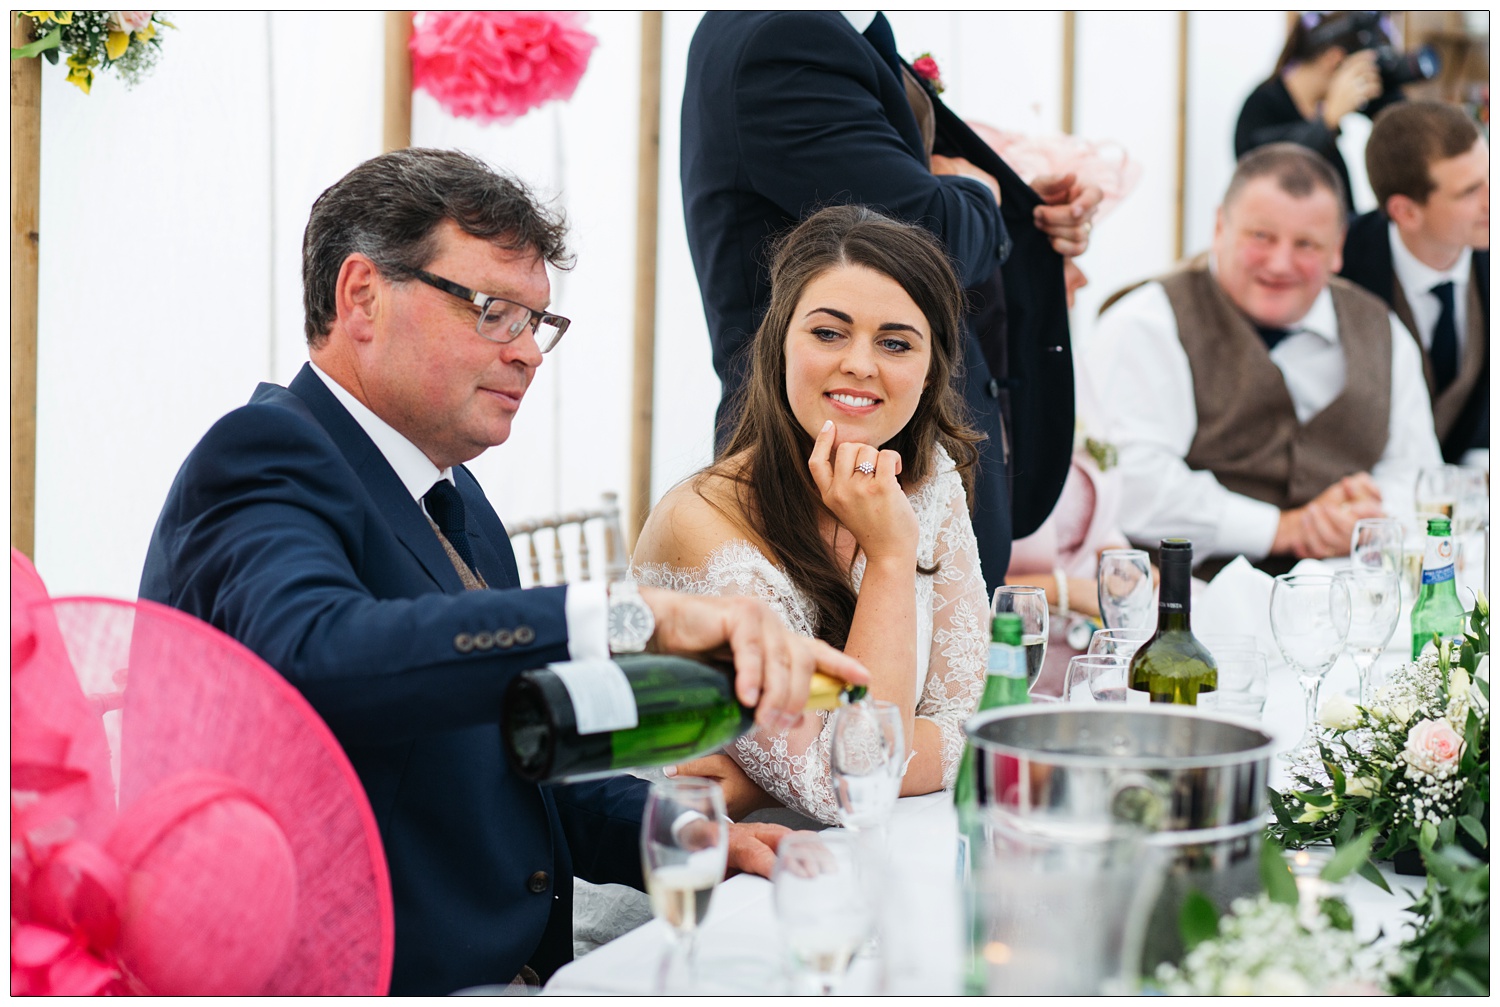 woman in wedding dress watching dad pour a drink